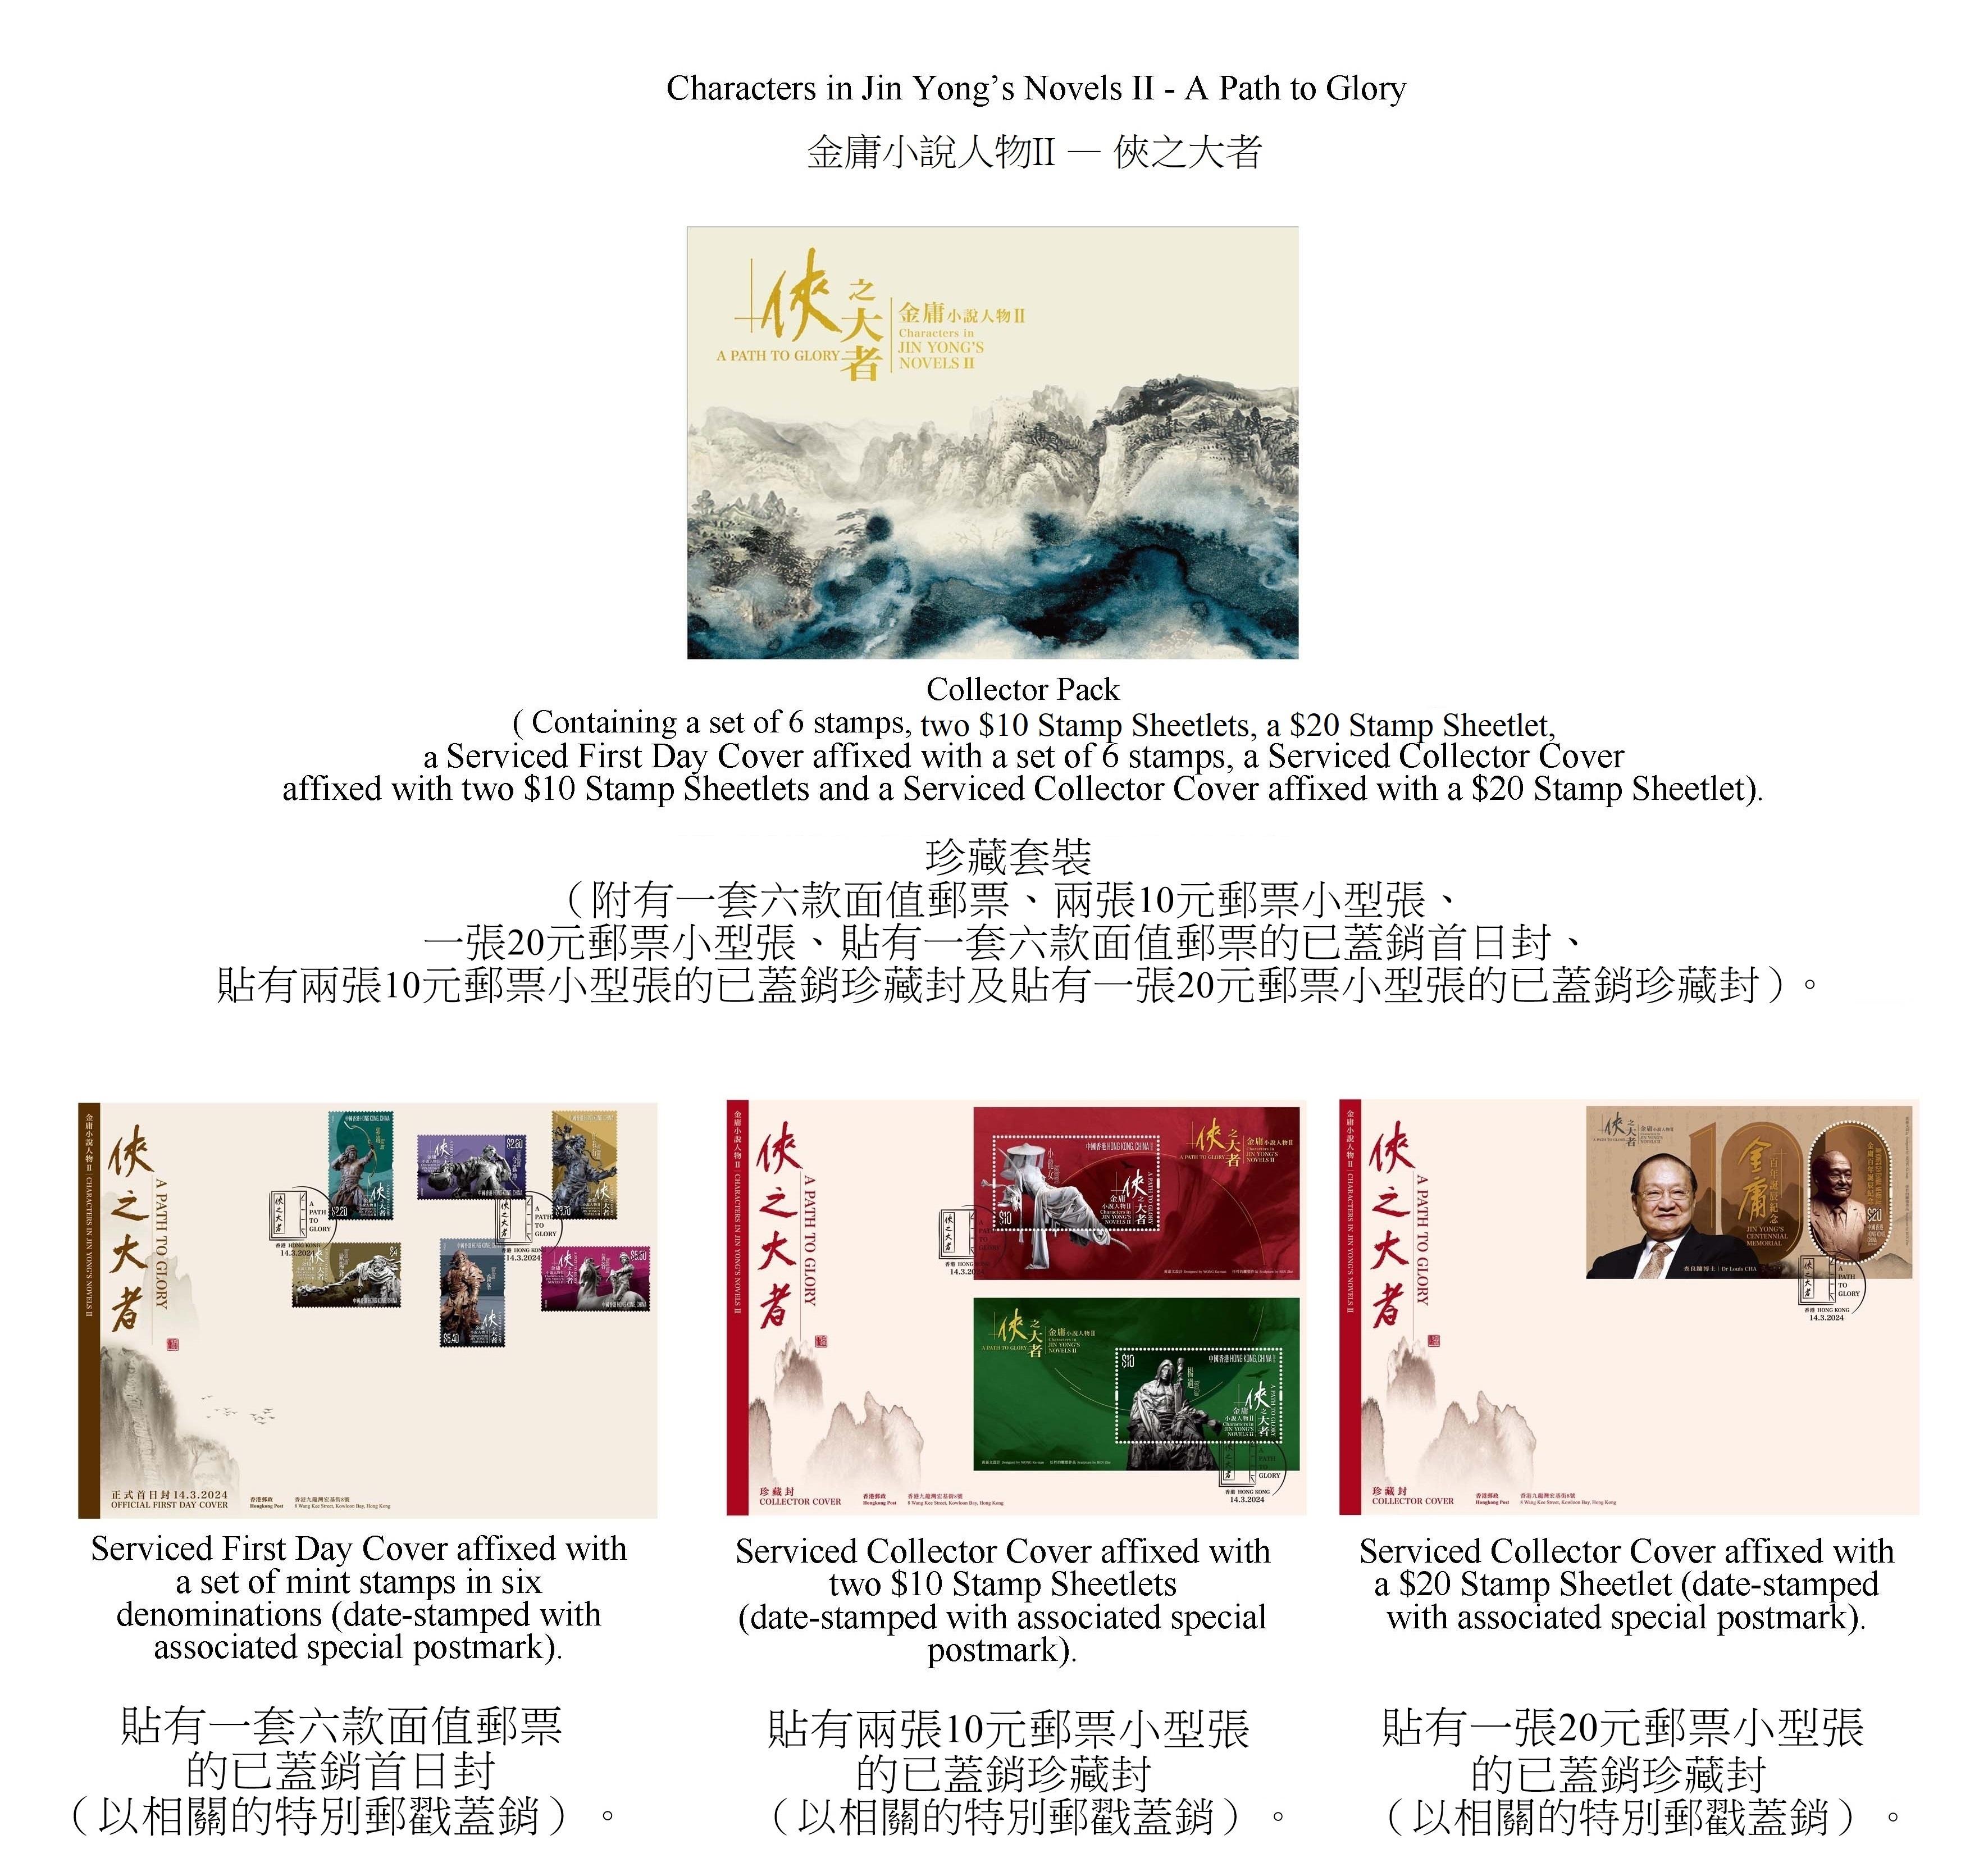 Hongkong Post will launch a special stamp issue and associated philatelic products on the theme of "Characters in Jin Yong's Novels II - A Path to Glory" on March 14 (Thursday). Photo shows the collector pack.

